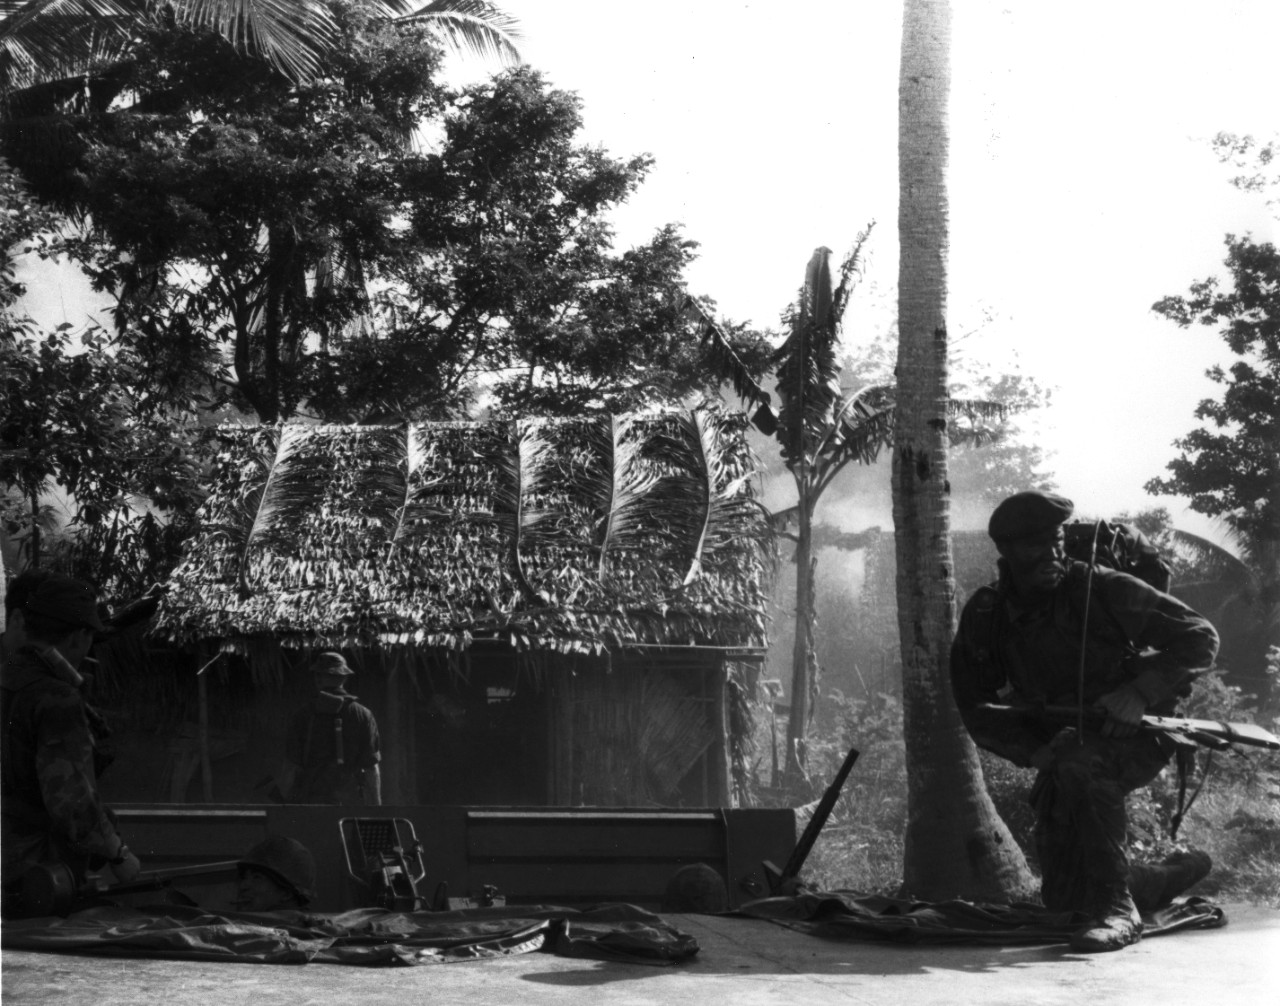 U.S. Navy SEALs go ashore into a heavily infested enemy area along the Bassac River, 67 miles south west of Saigon, to conduct a one-day Operation Crimson Tide against enemy fortifications, bunkers, and sampans.